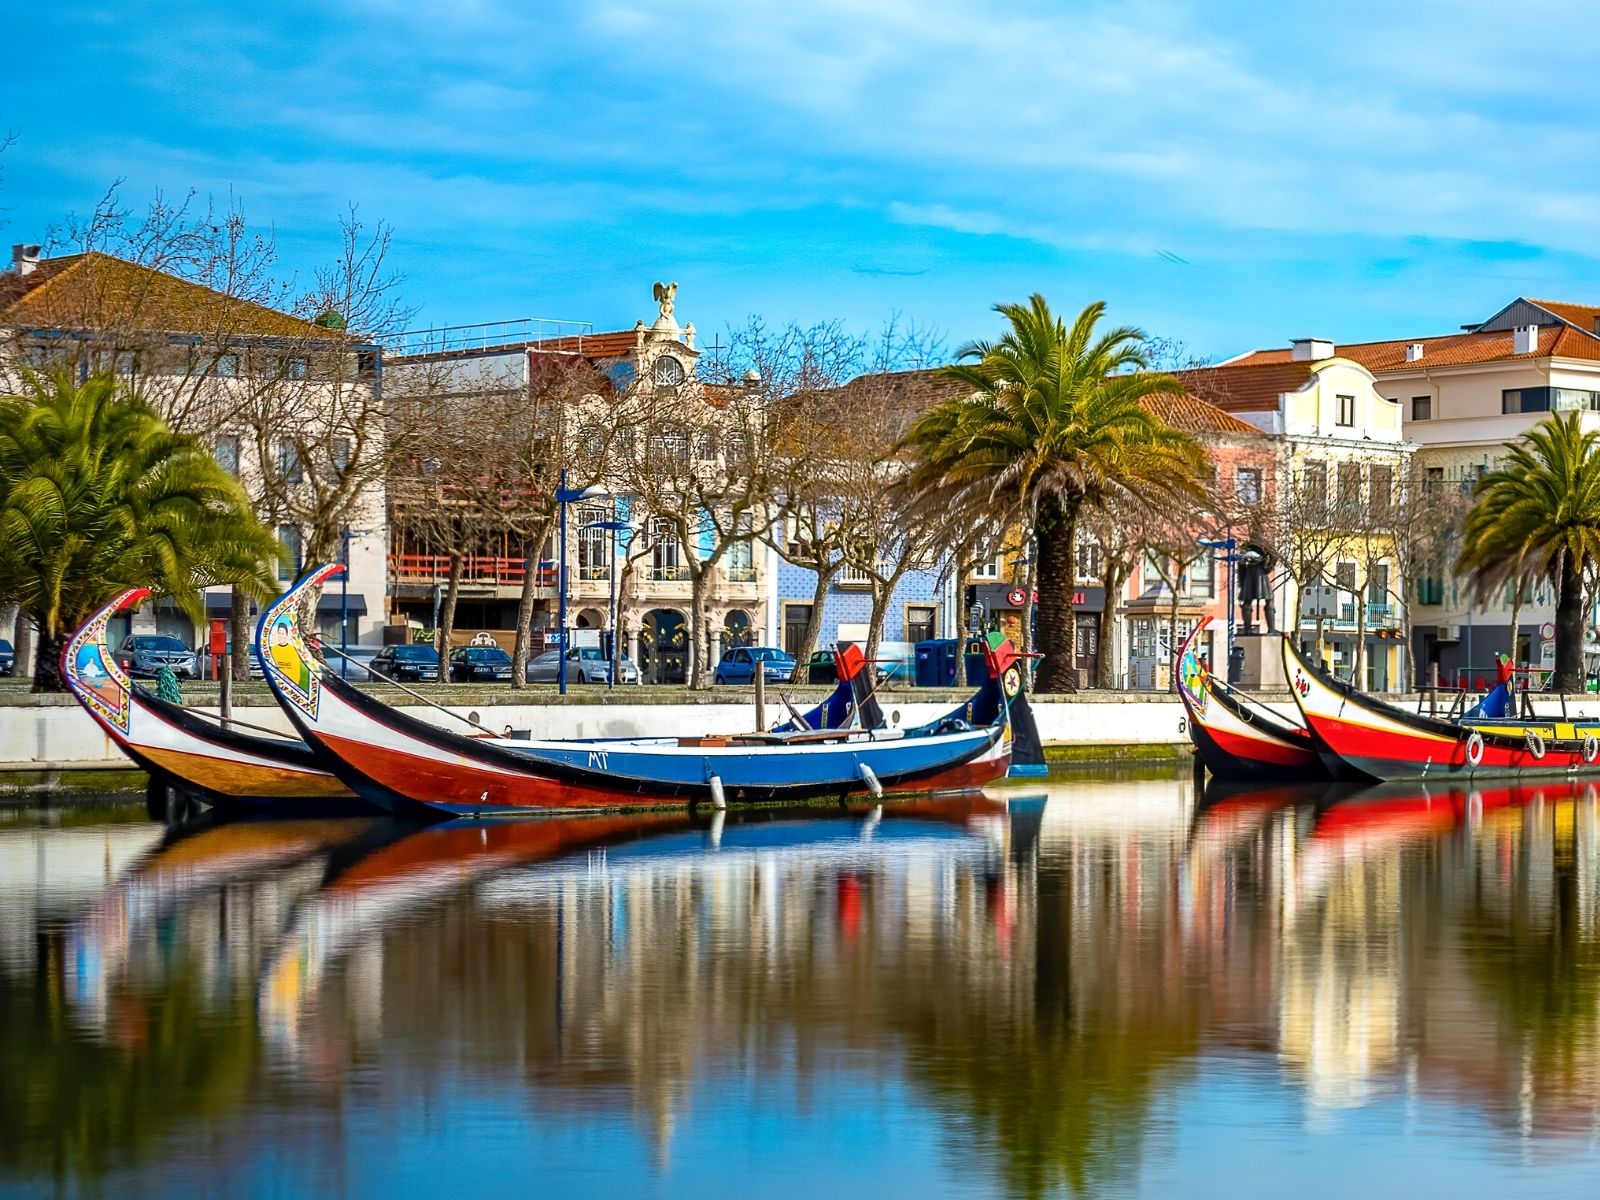 view from river of colorful boats on via of aveiro portugal